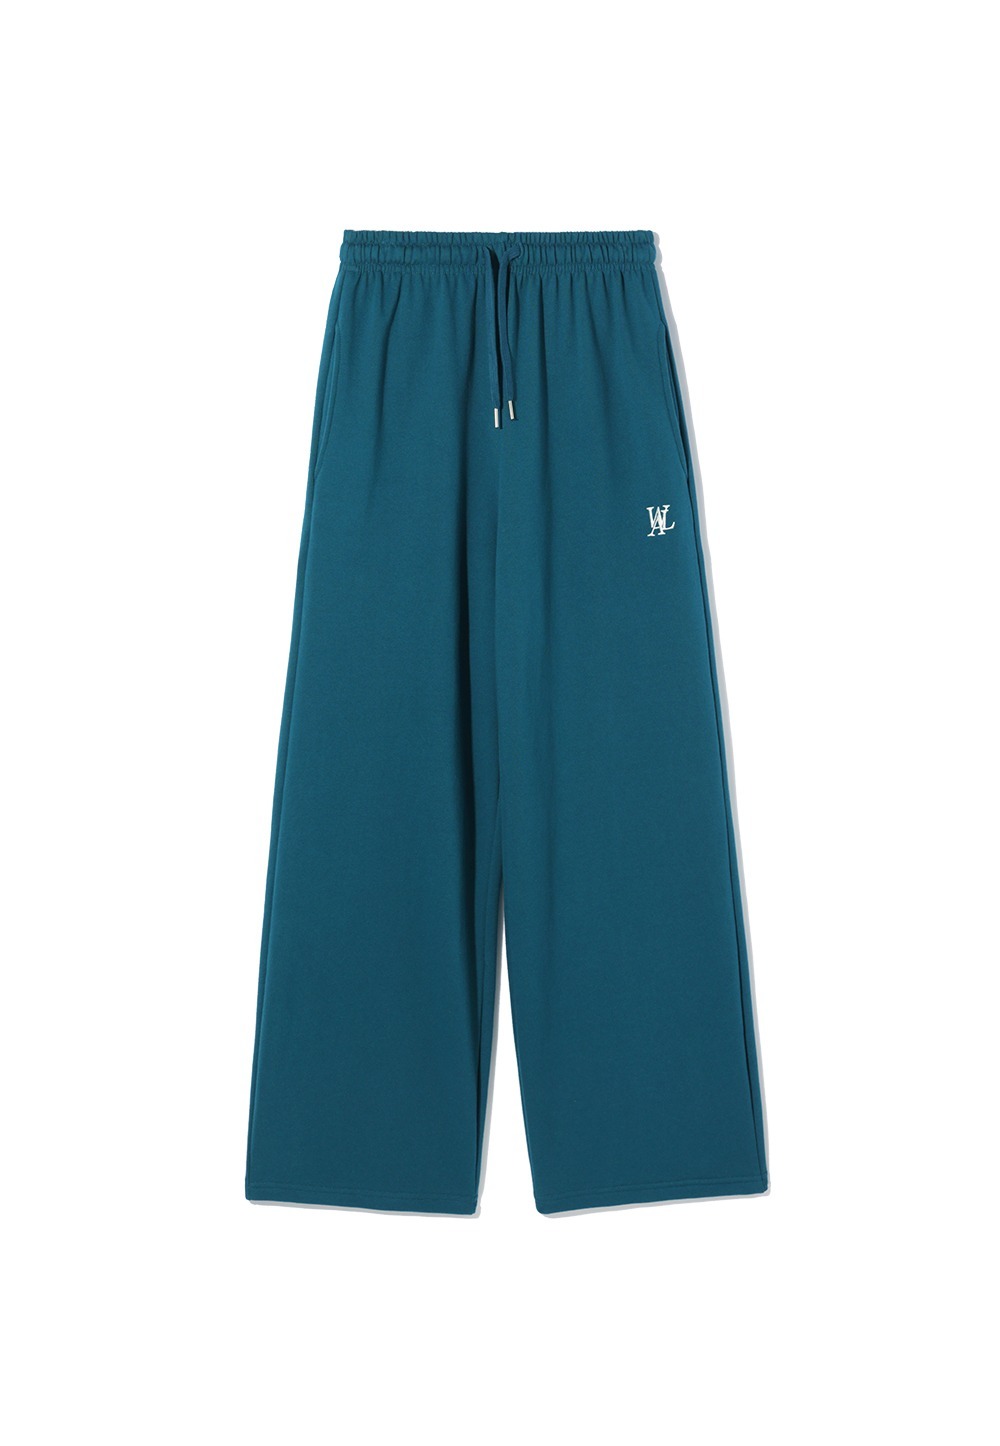 Signature relax wide pants - TURQUOISE